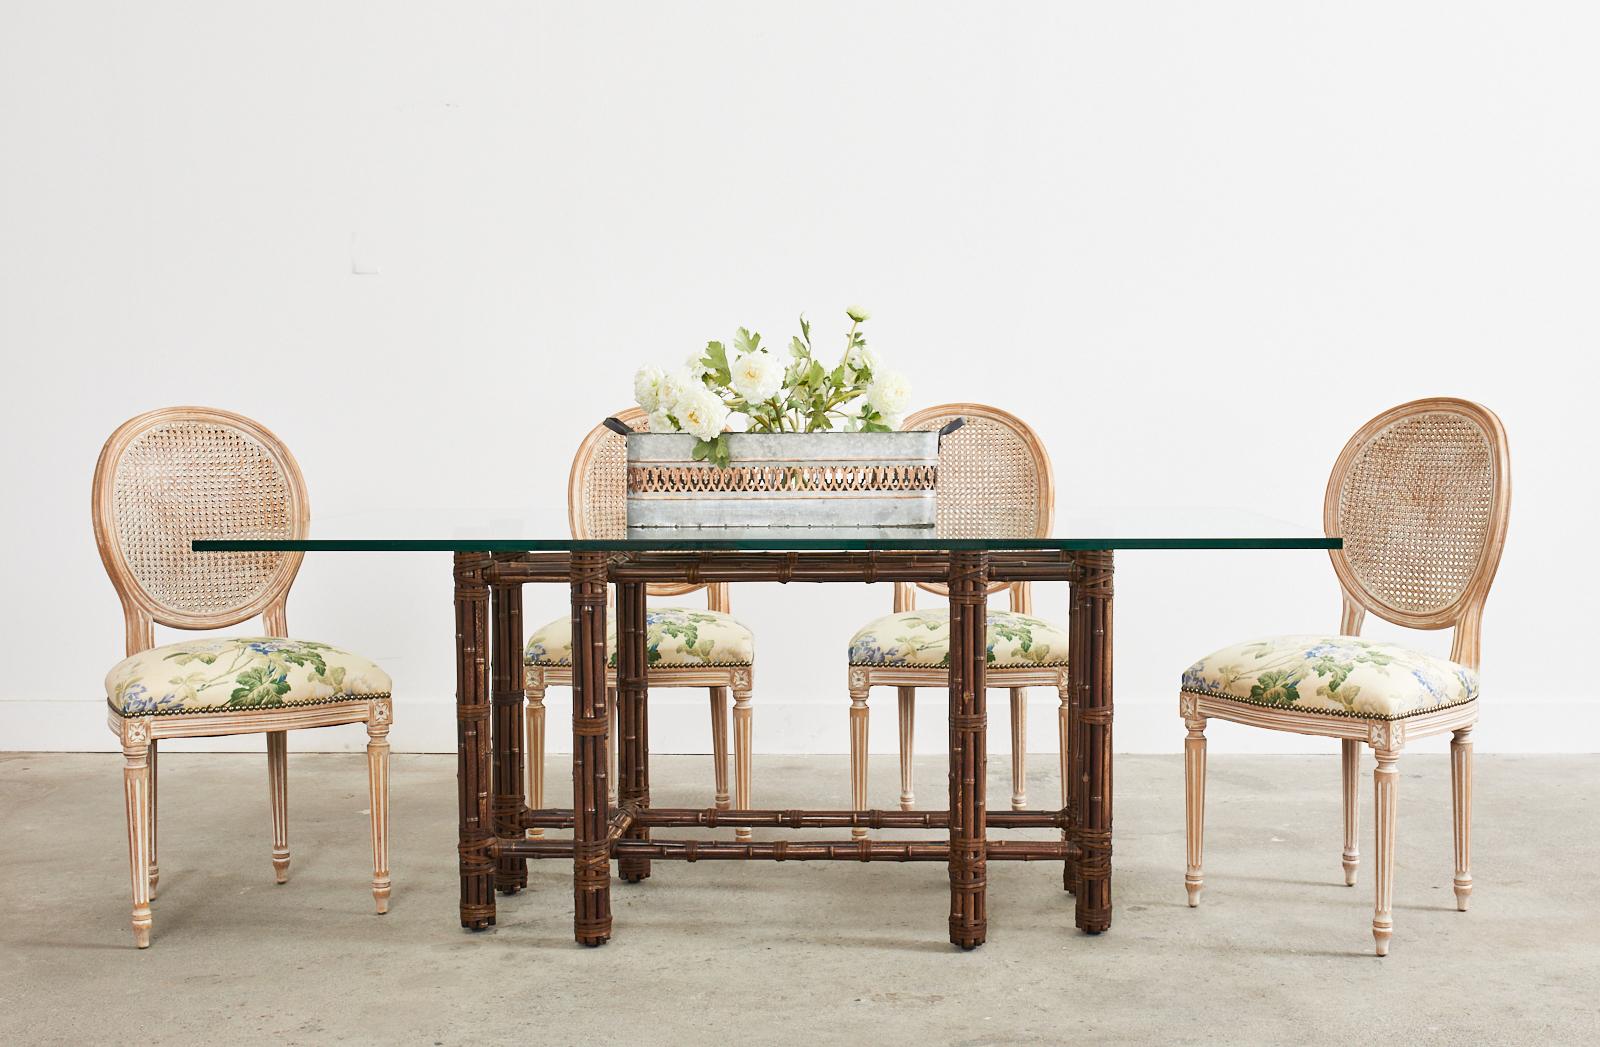 Handsome bamboo rattan rectangular dining table made in the California organic modern style by McGuire. Genuine McGuire model #MCBA22 with an iron frame painted golden gate orange for authenticity. The eight leg base measures 46 wide by 21 inches